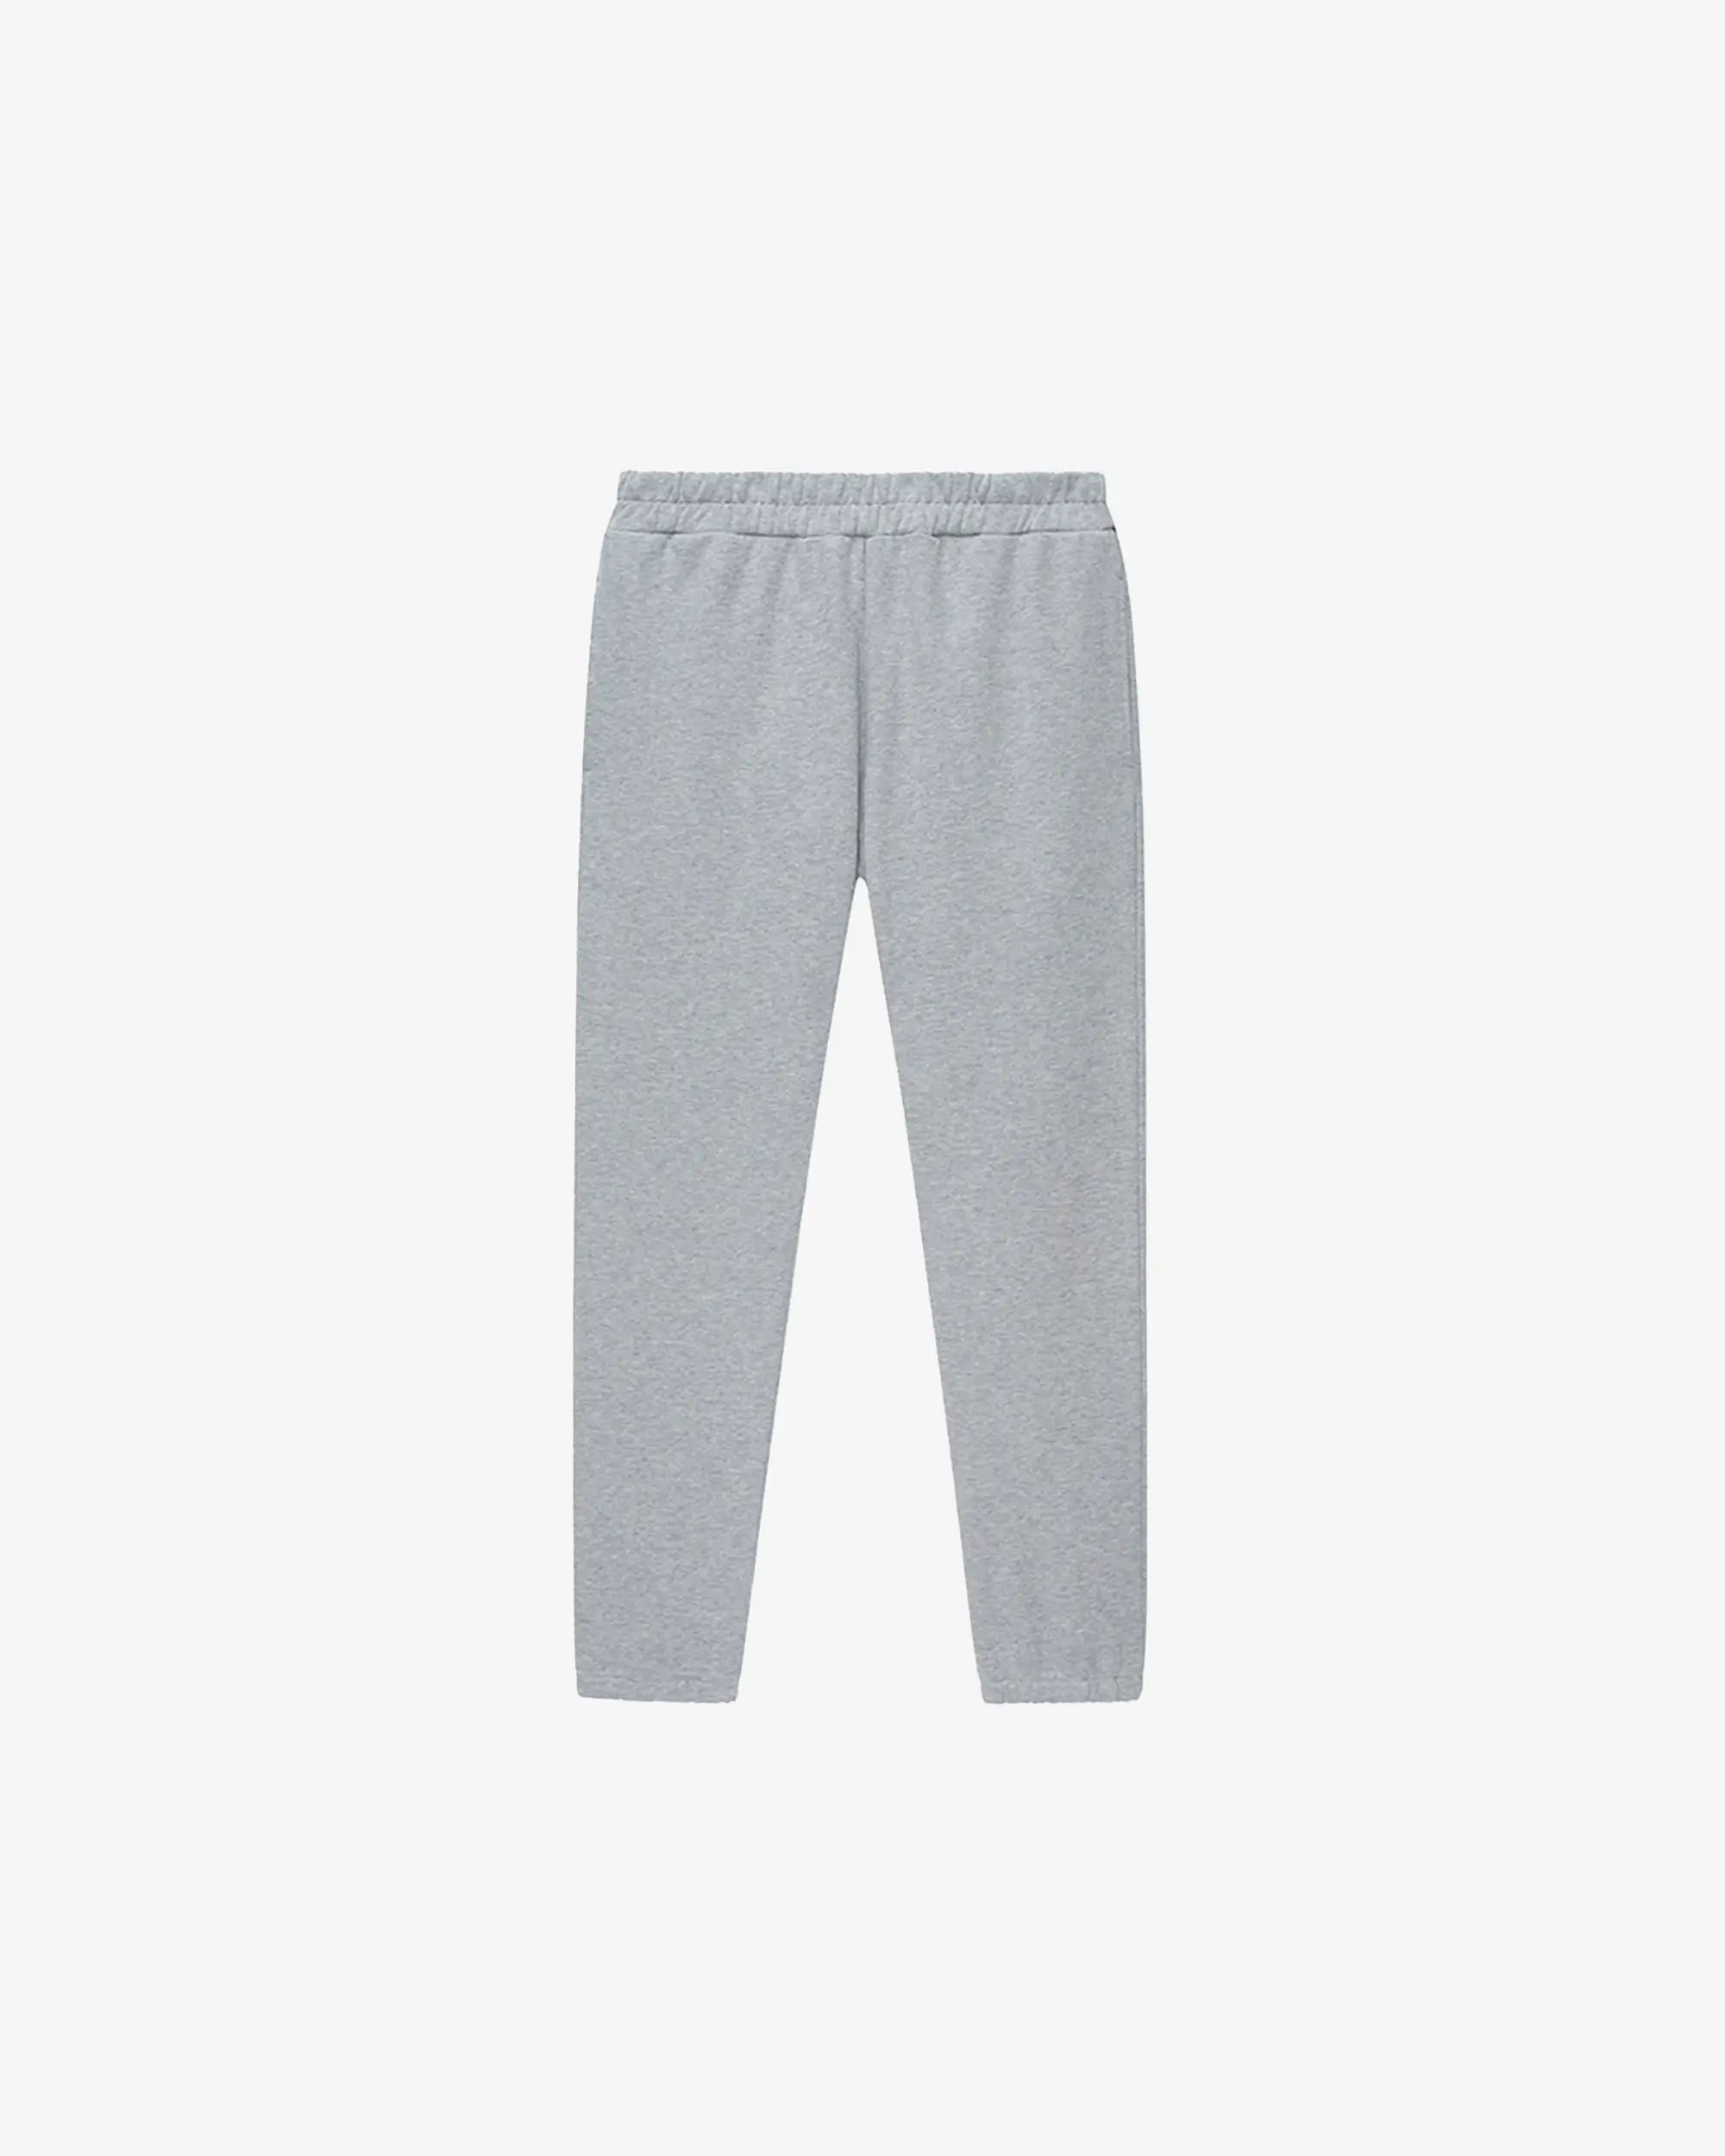 nice rice 100% Cotton Cinched Sweatpants